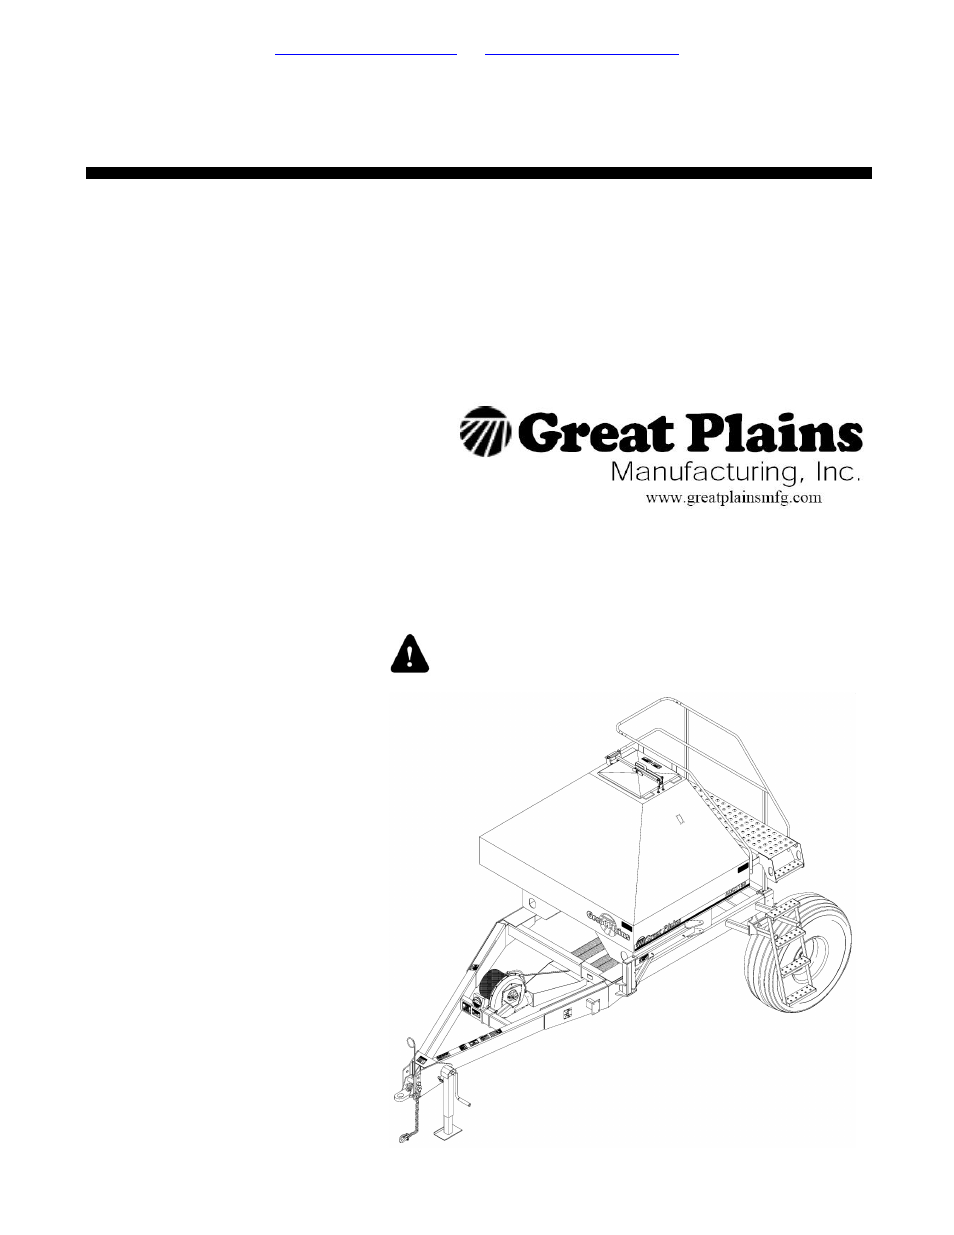 Great Plains ADC1150 Parts Manua User Manual | 62 pages